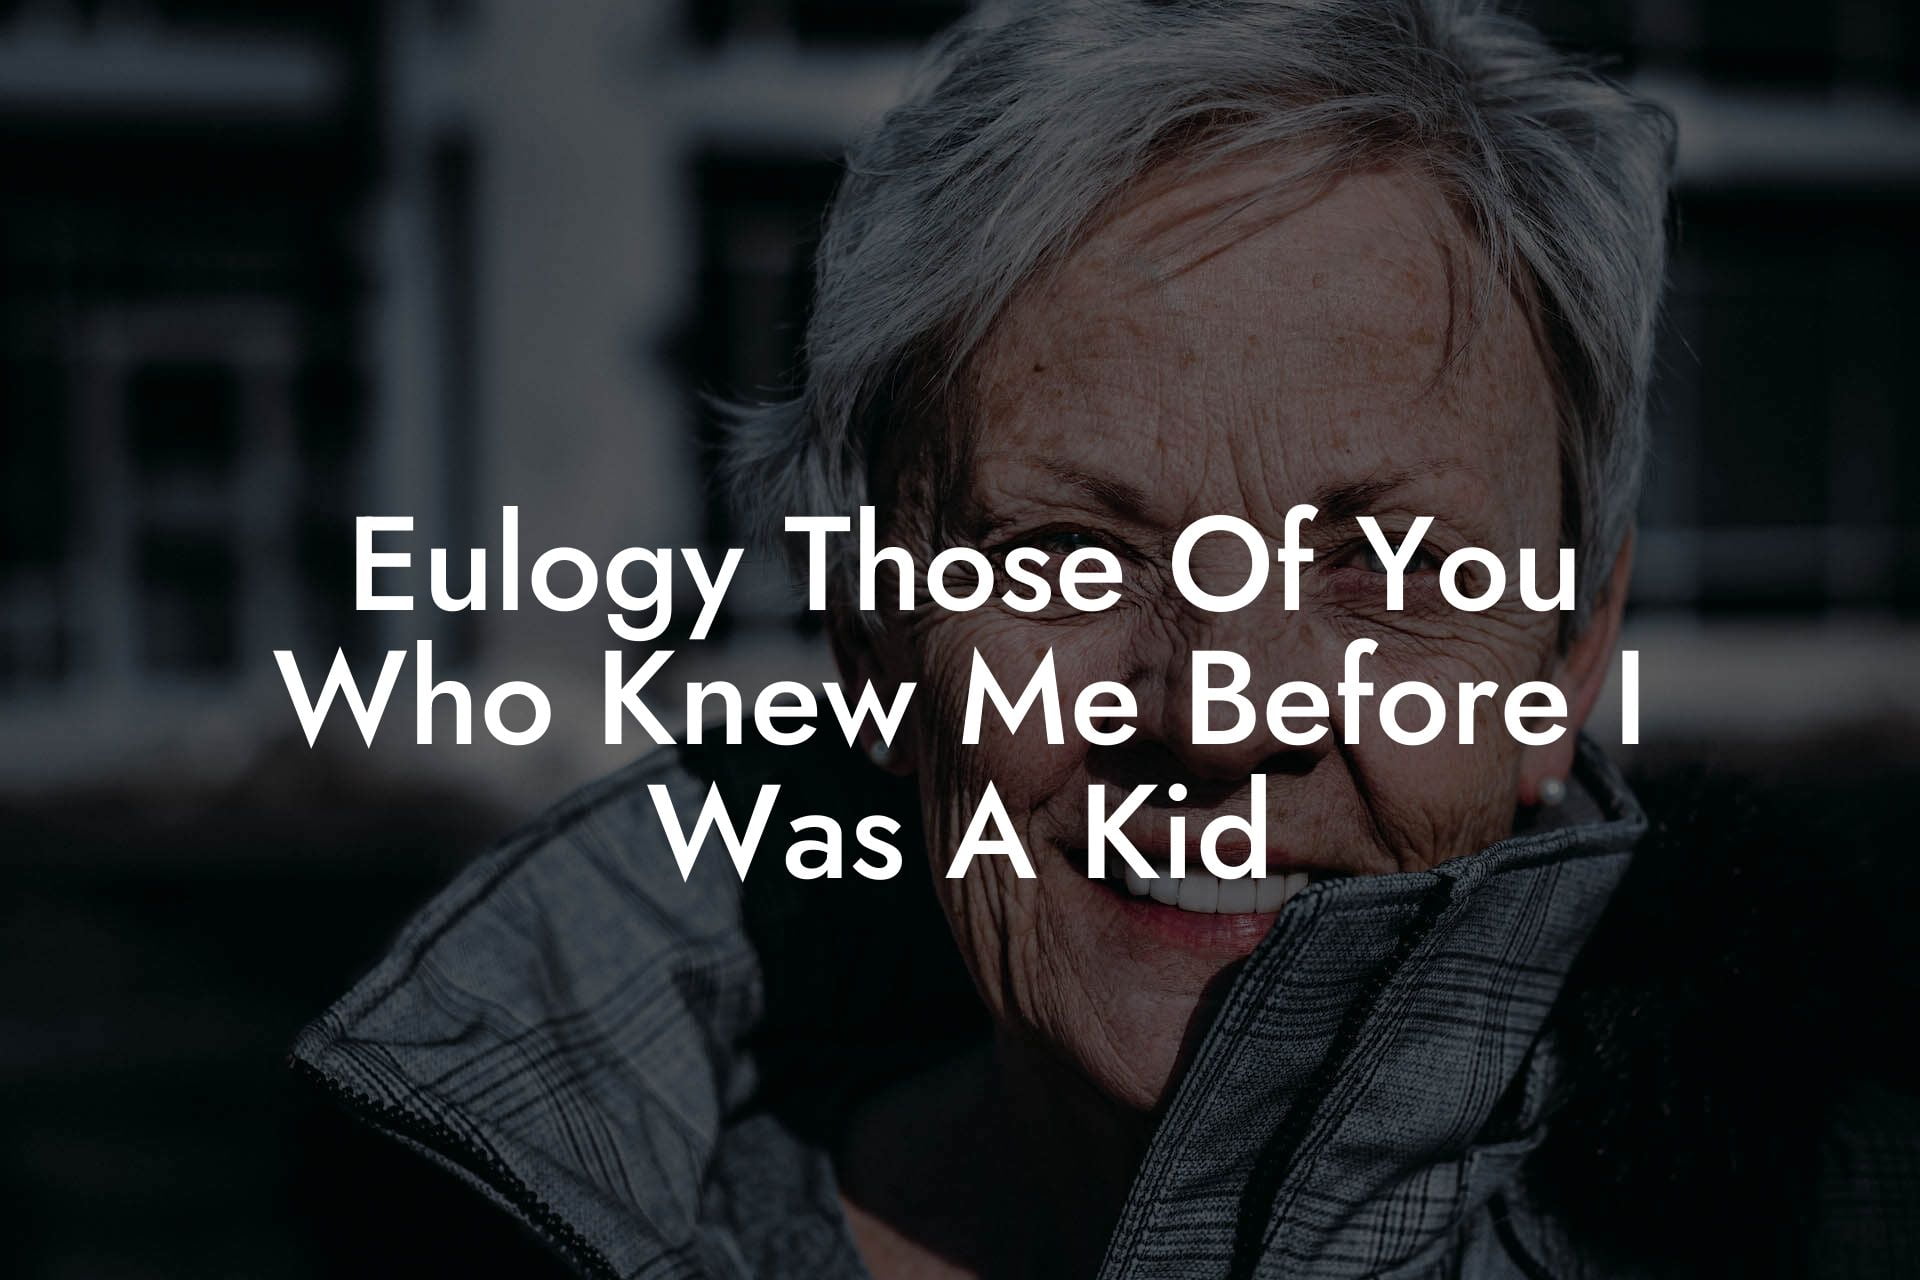 Eulogy Those Of You Who Knew Me Before I Was A Kid